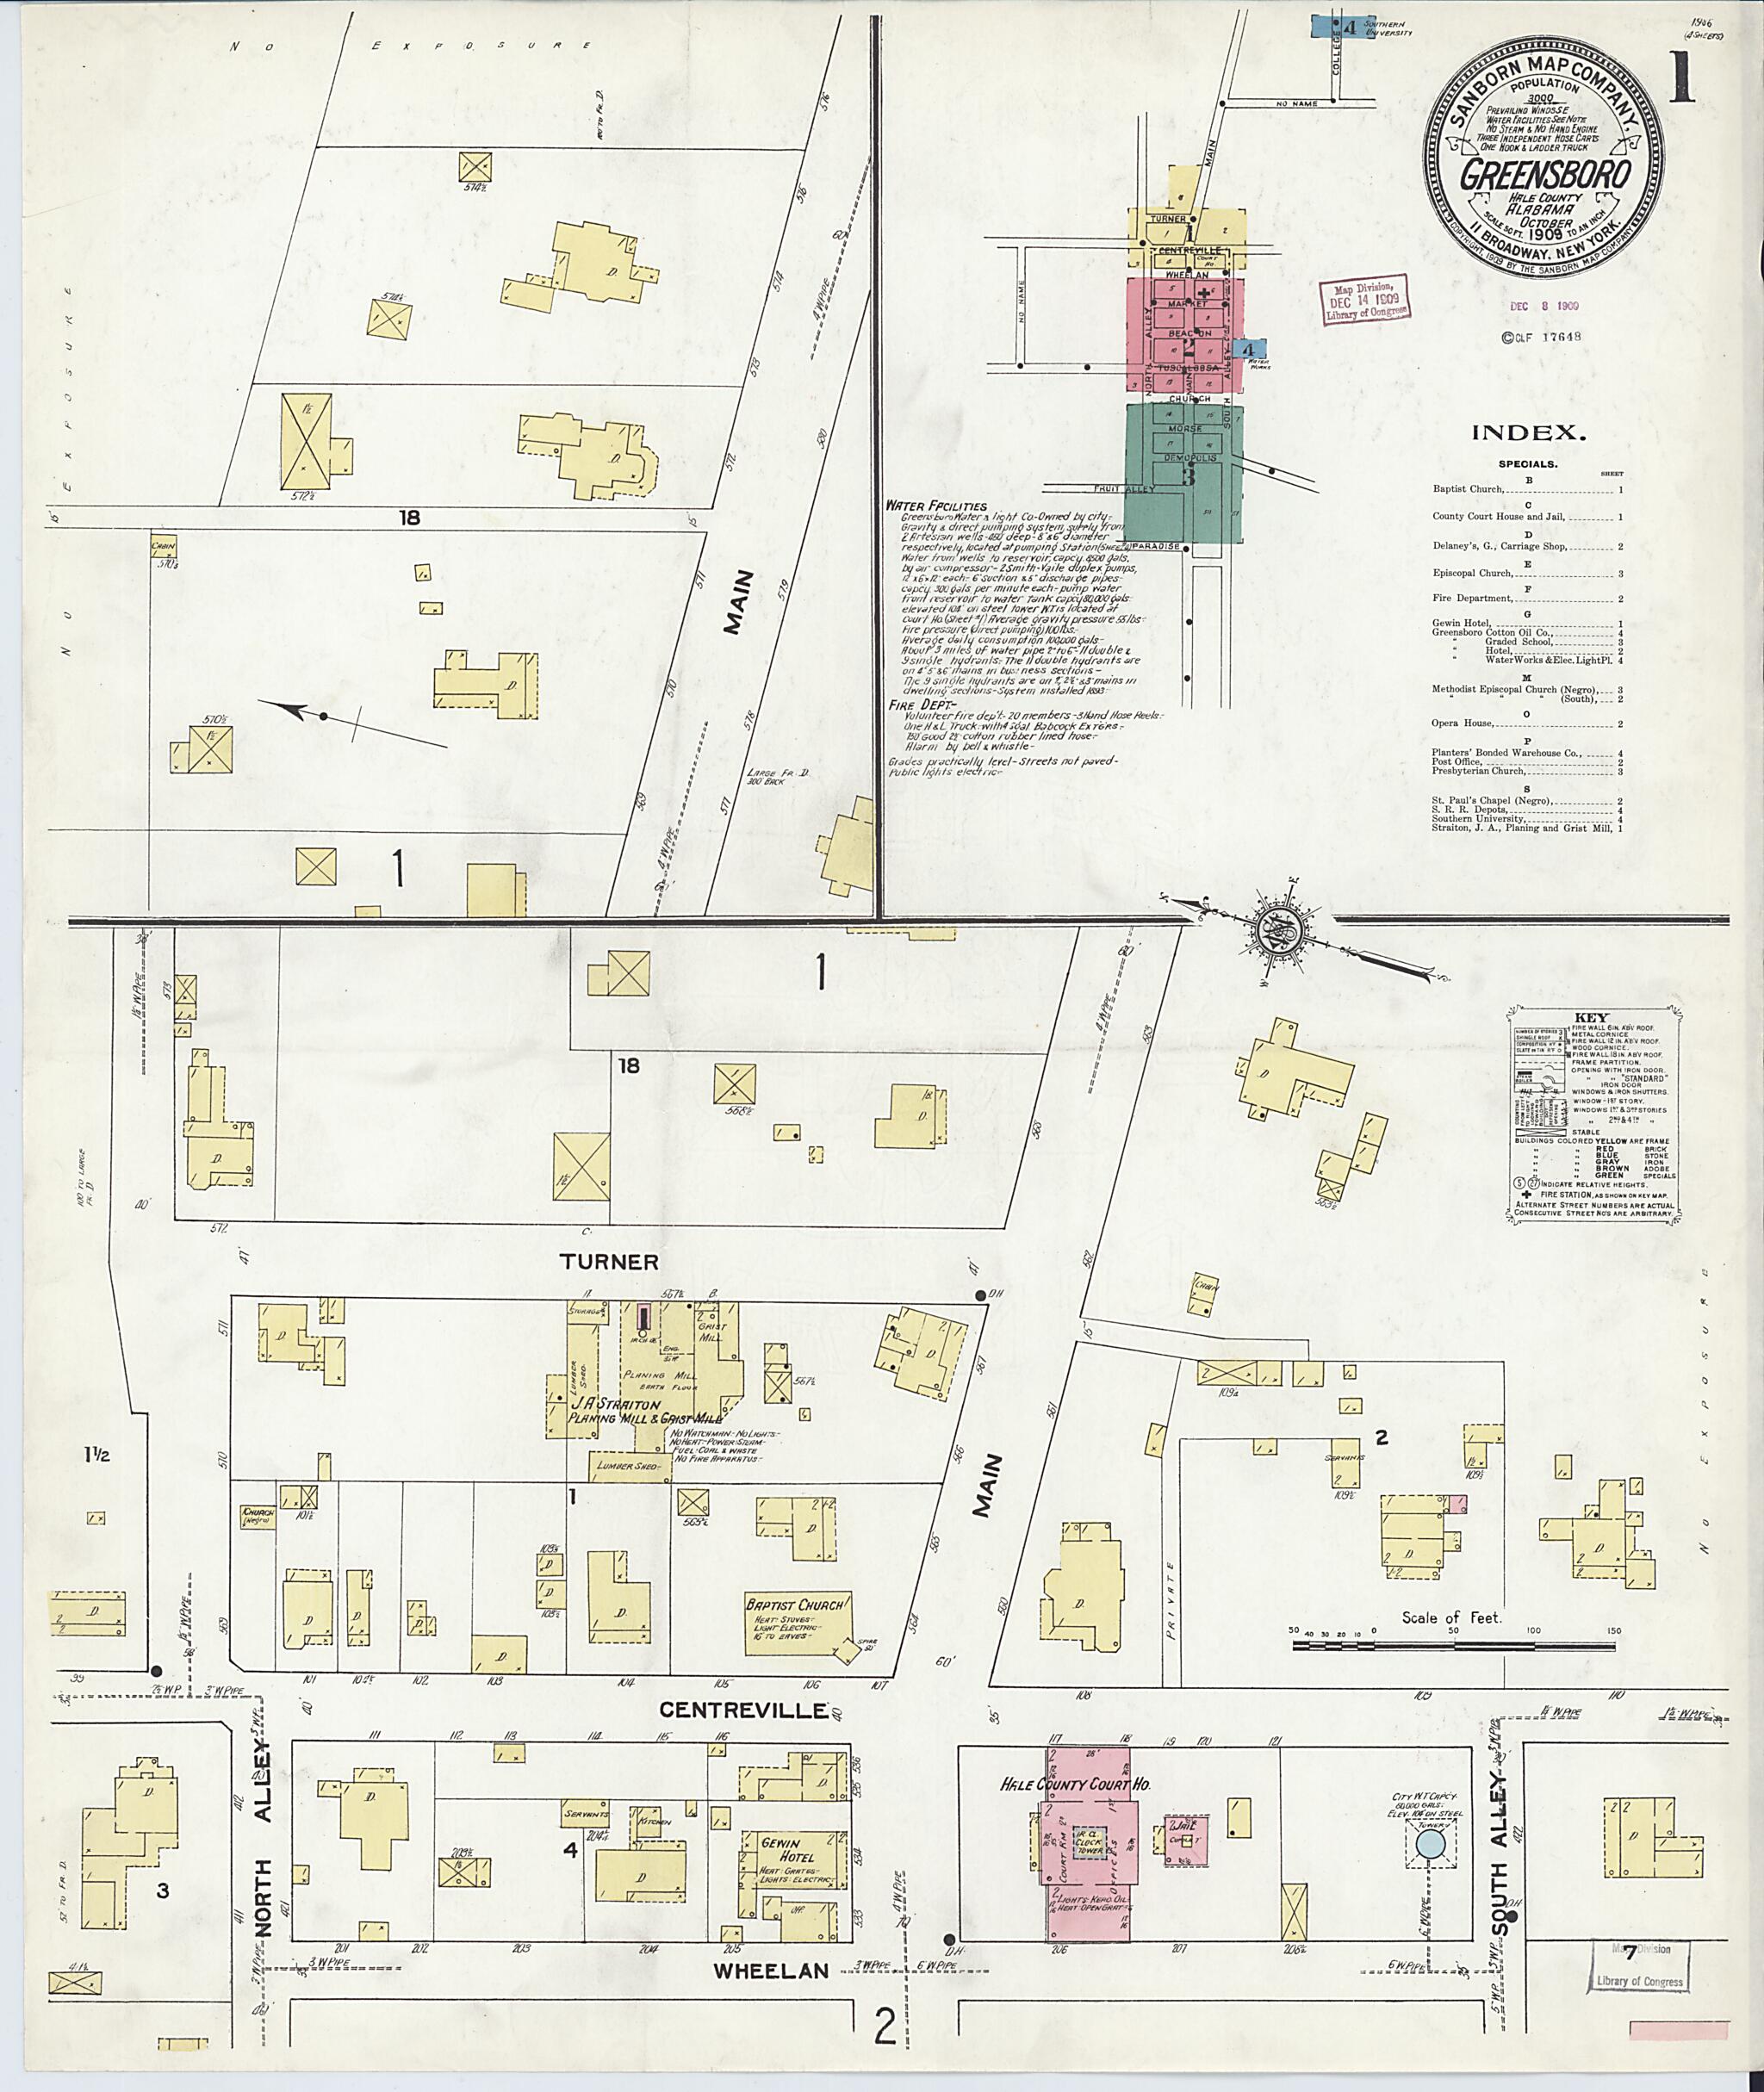 This old map of Greensboro, Hale County, Alabama was created by Sanborn Map Company in 1909